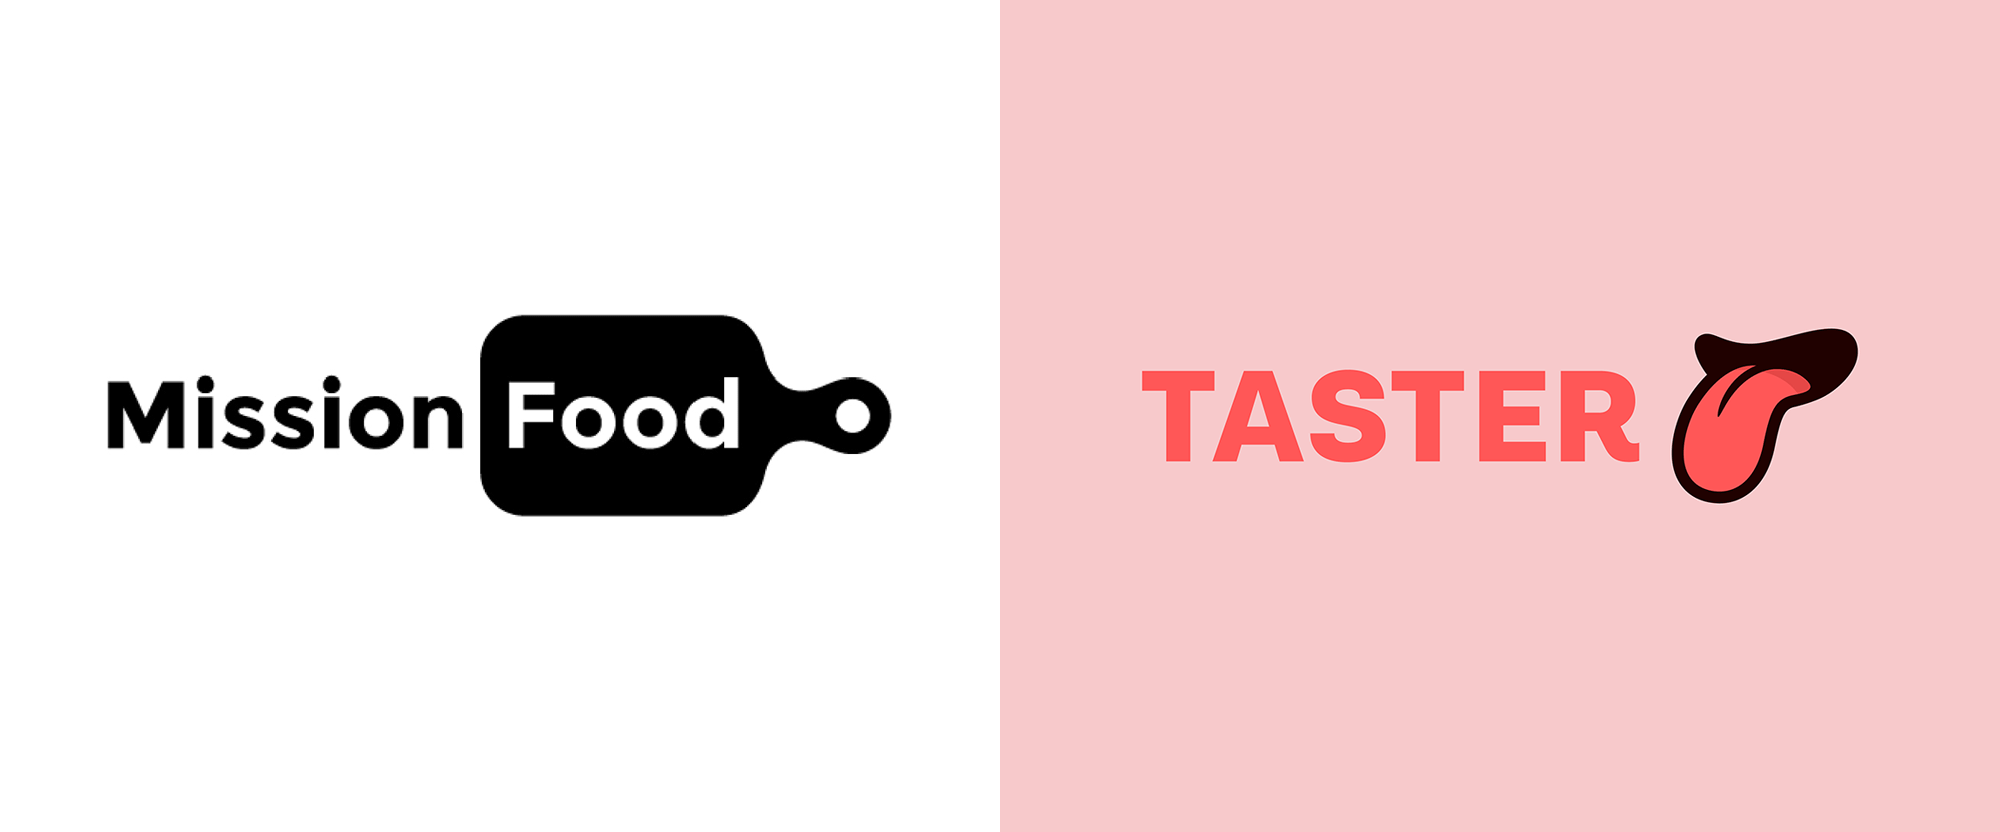 Brand Name Food Logo - Brand New: New Name, Logo, and Identity for Taster by Koto